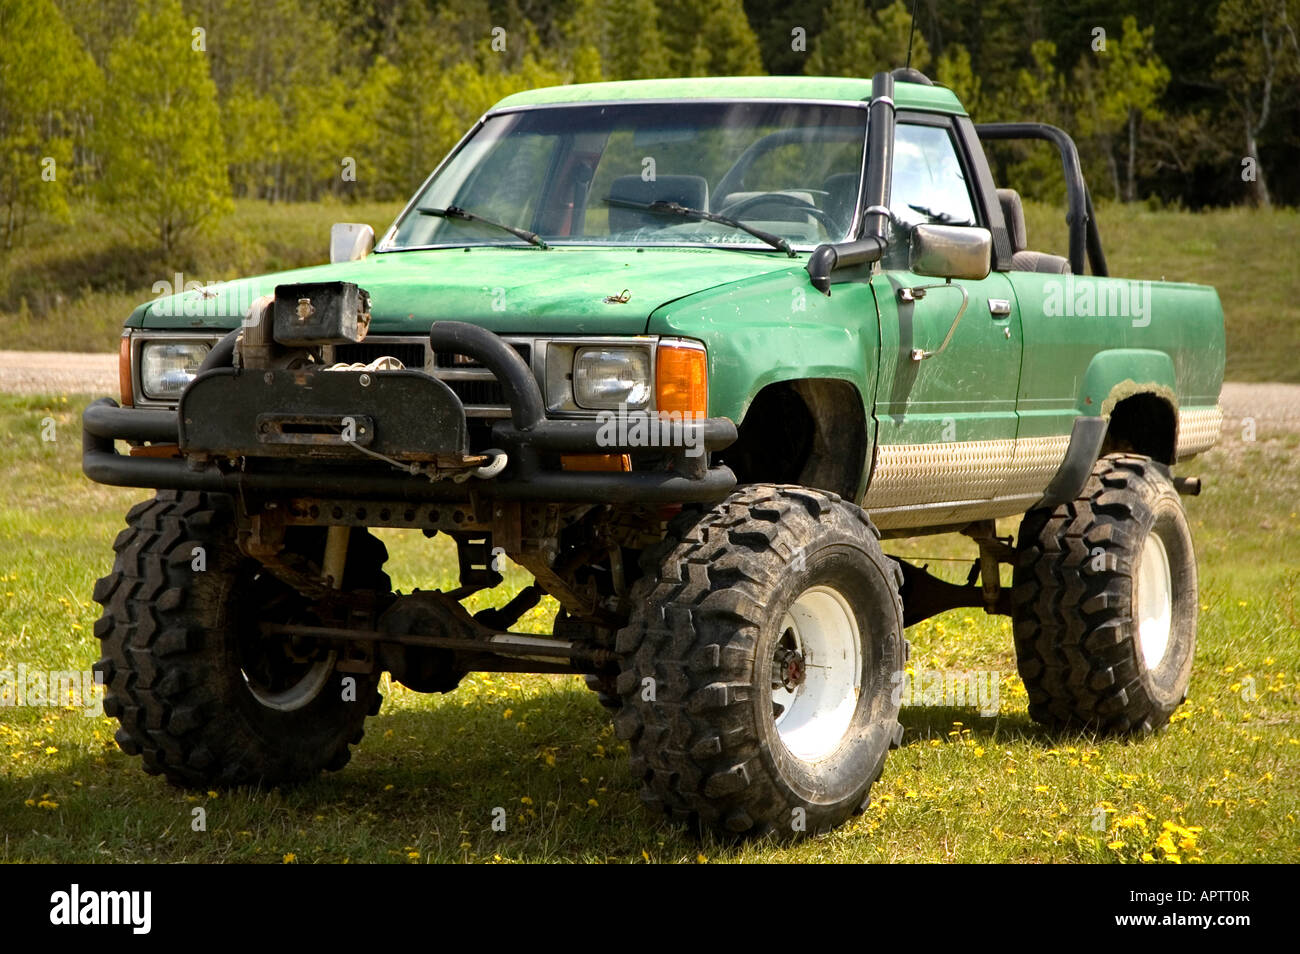 hilux4x4 #carros #offroad #rural #barnfind #antesedepois #cars #picku